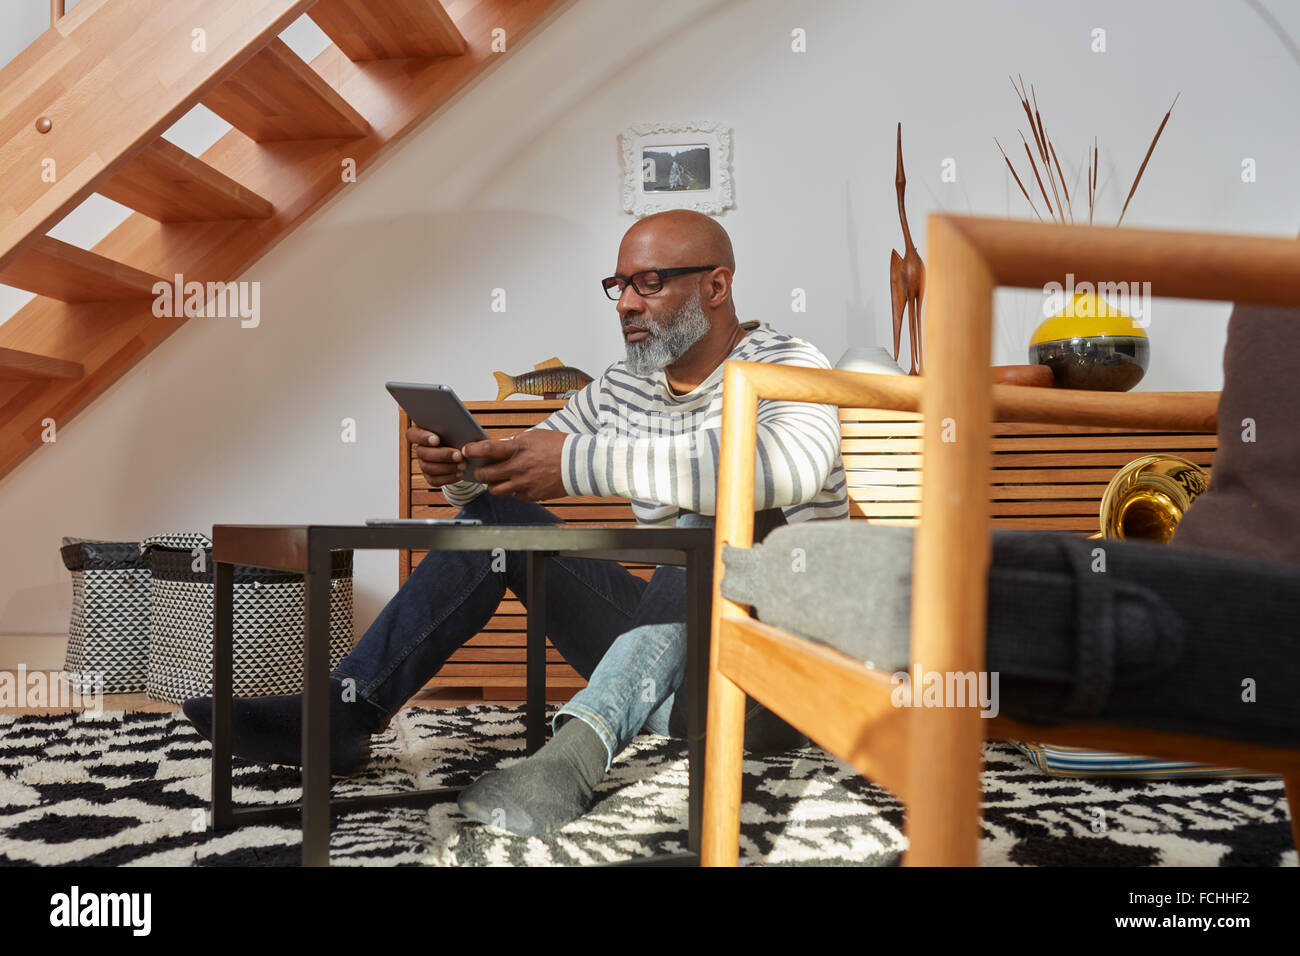 Man sitting on the floor of his living room using digital tablet Stock Photo